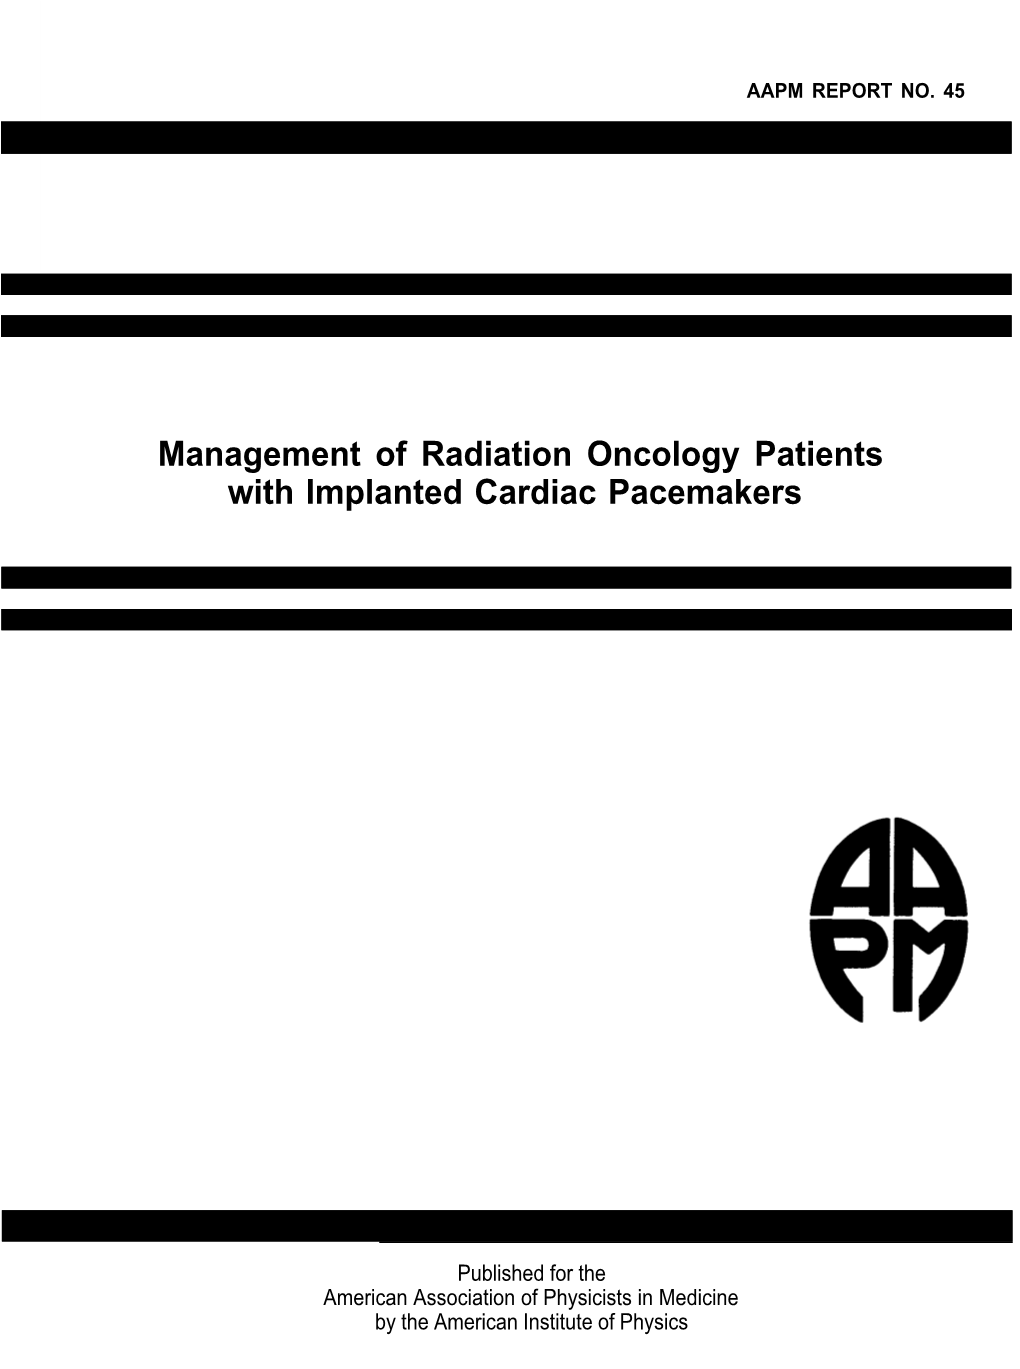 Management of Radiation Oncology Patients with Implanted Cardiac Pacemakers